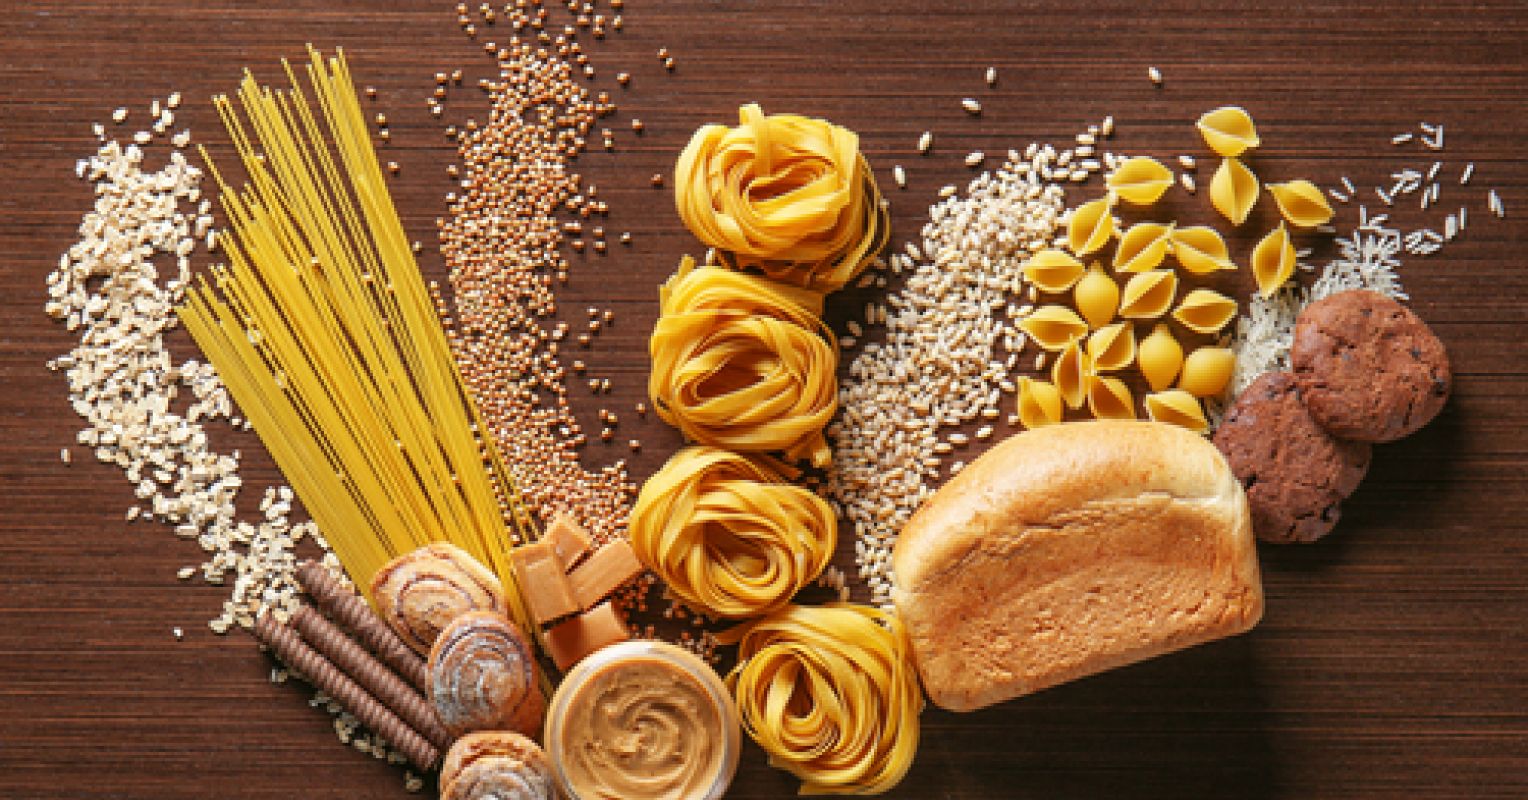 Too Little of a Good Thing: Carbohydrates | Psychology Today